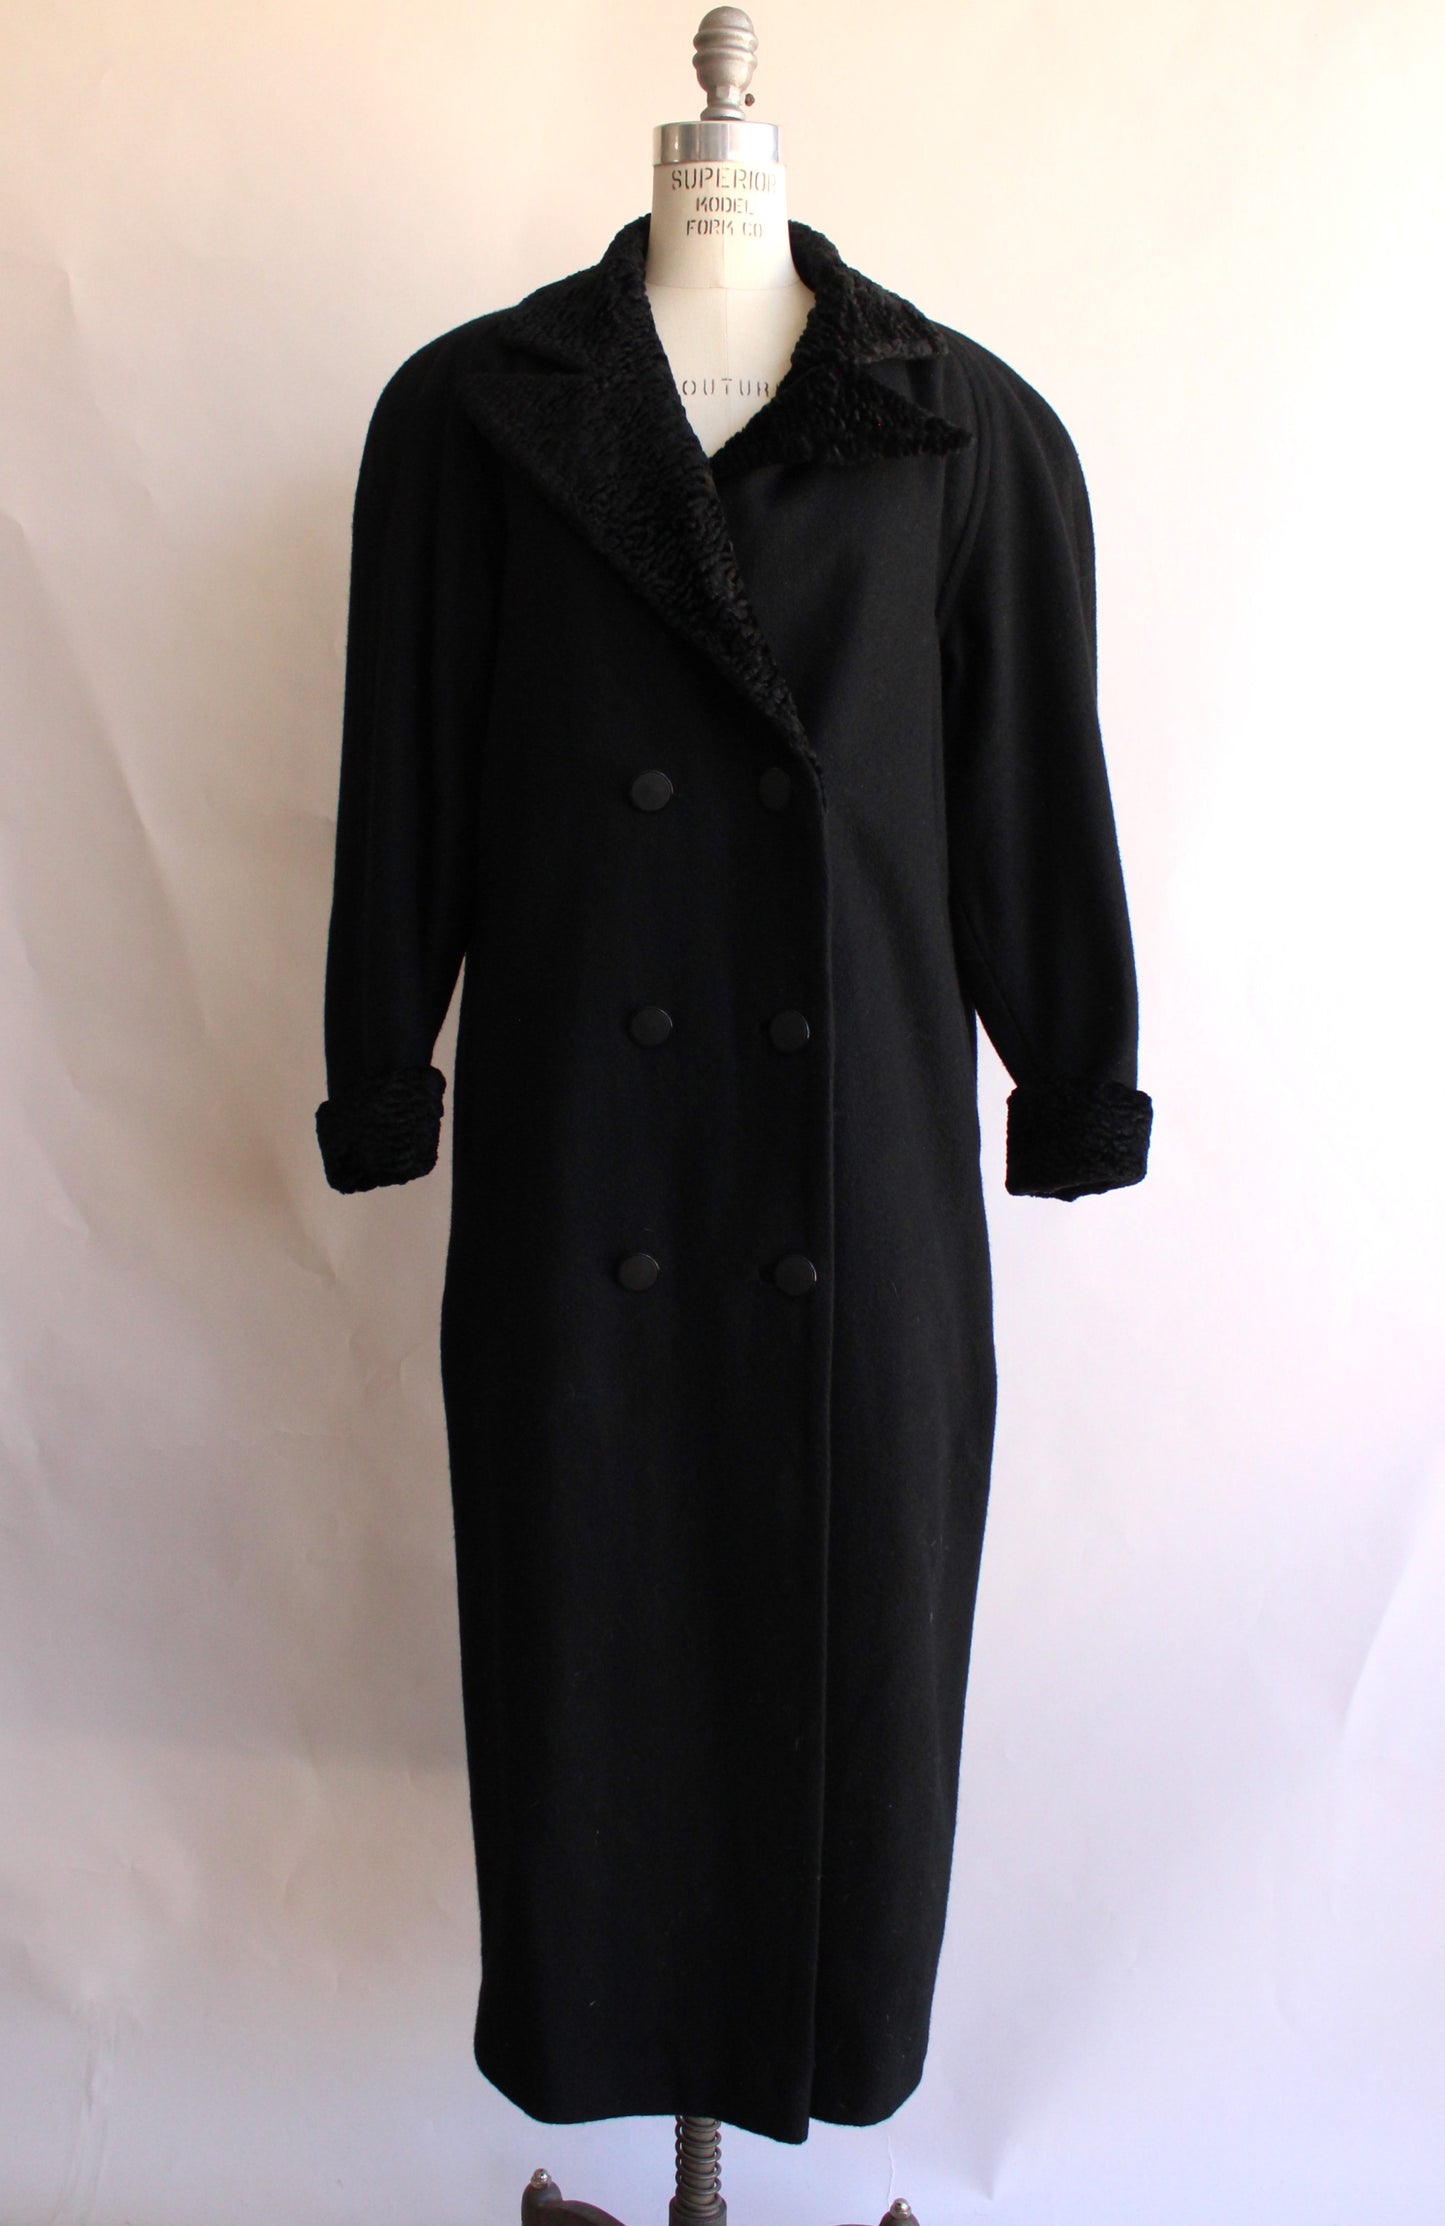 Vintage 1980s Black Wool Double Breasted Overcoat